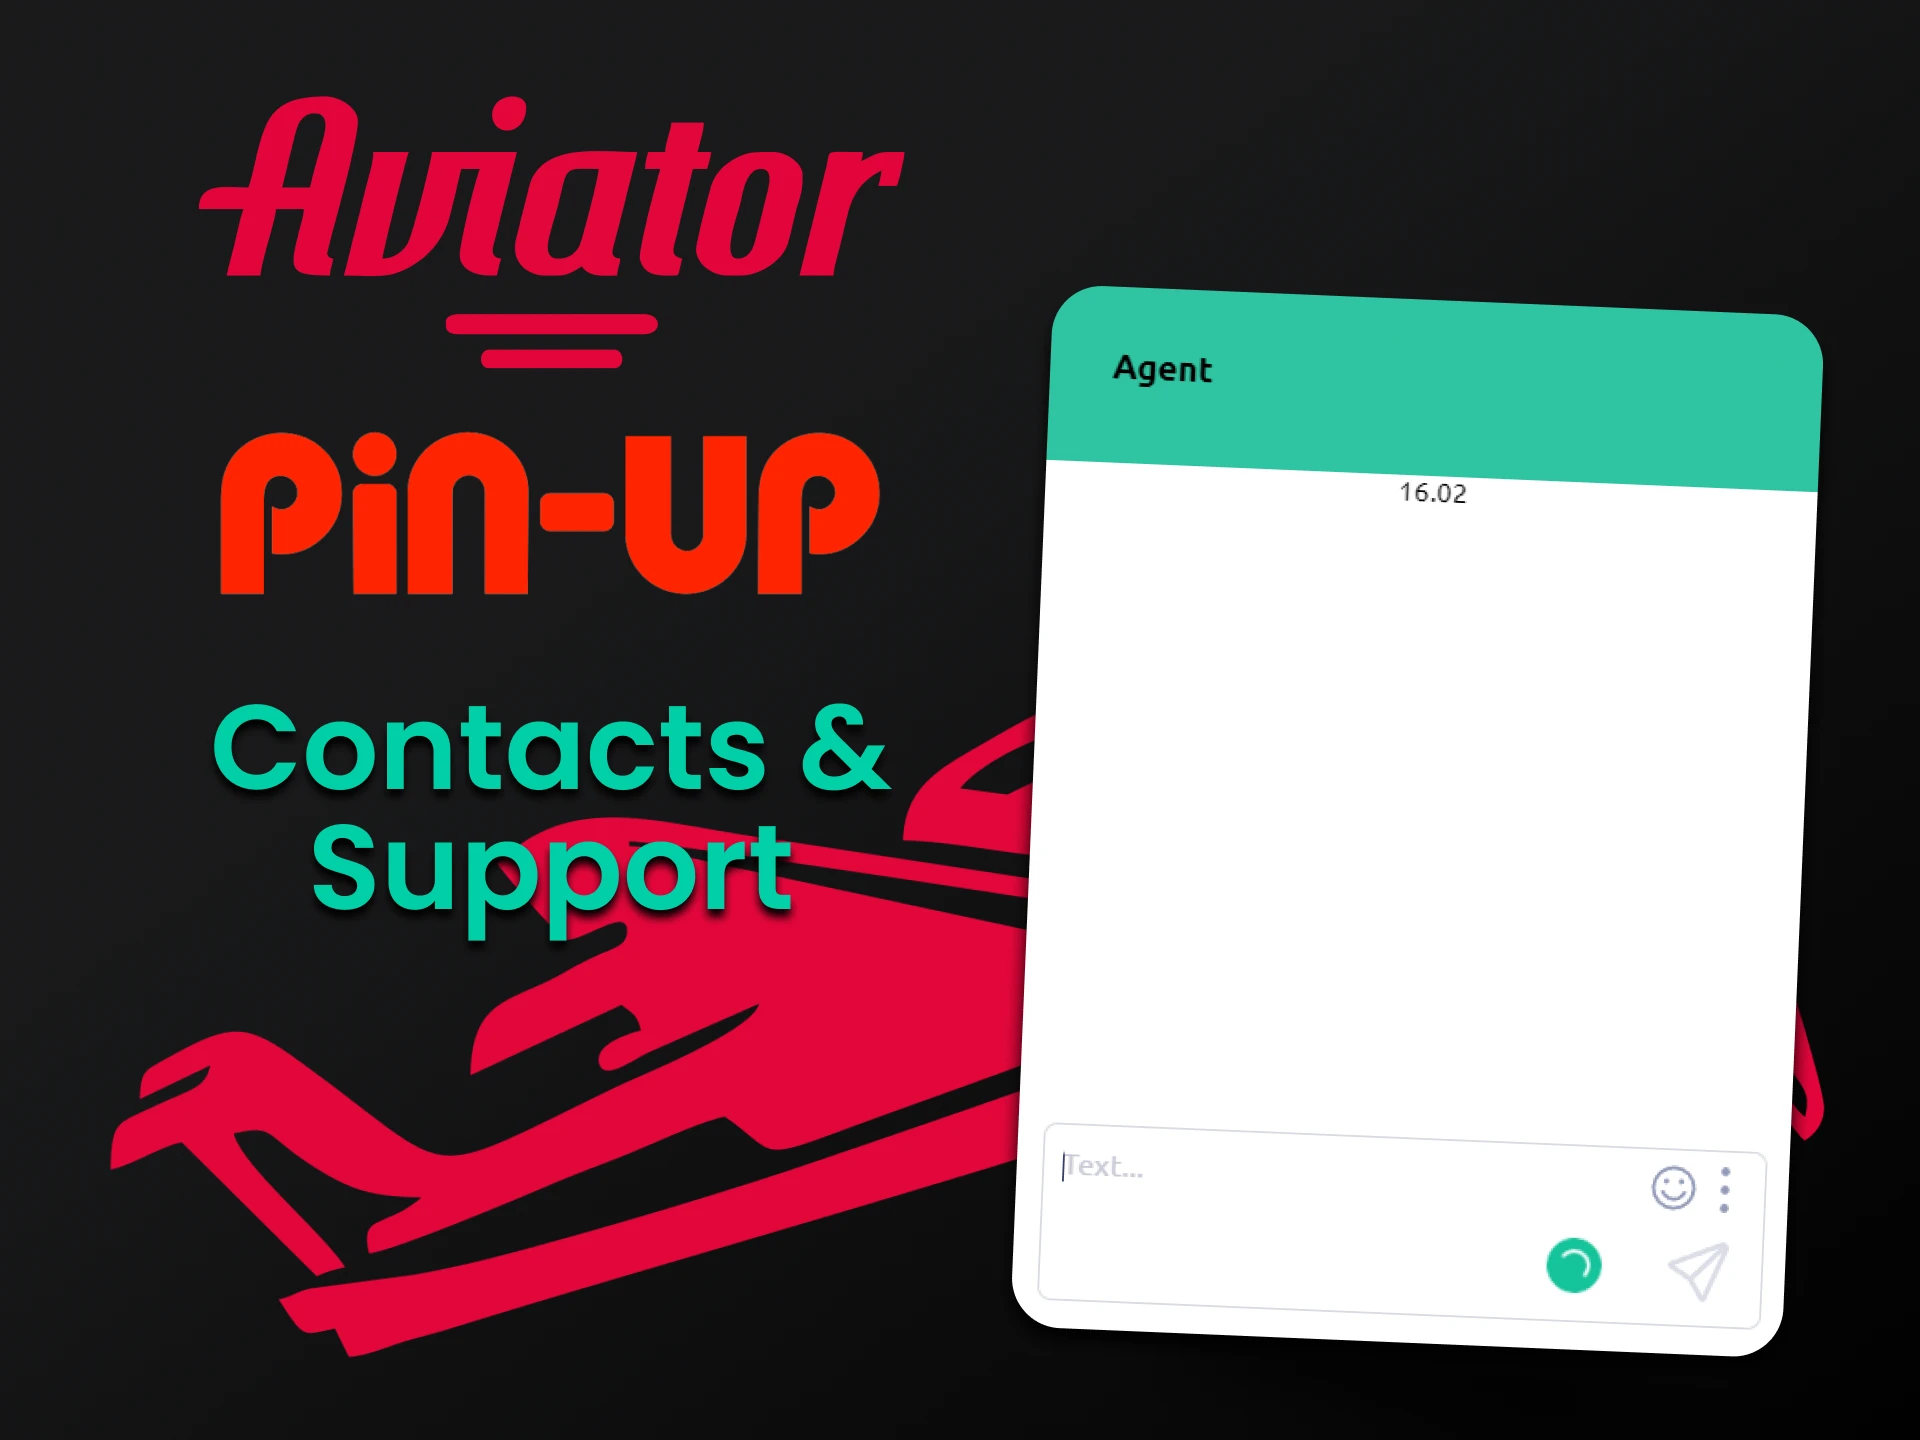 If you have any problems with the game Aviator, you can always report it to the Pin Up team.